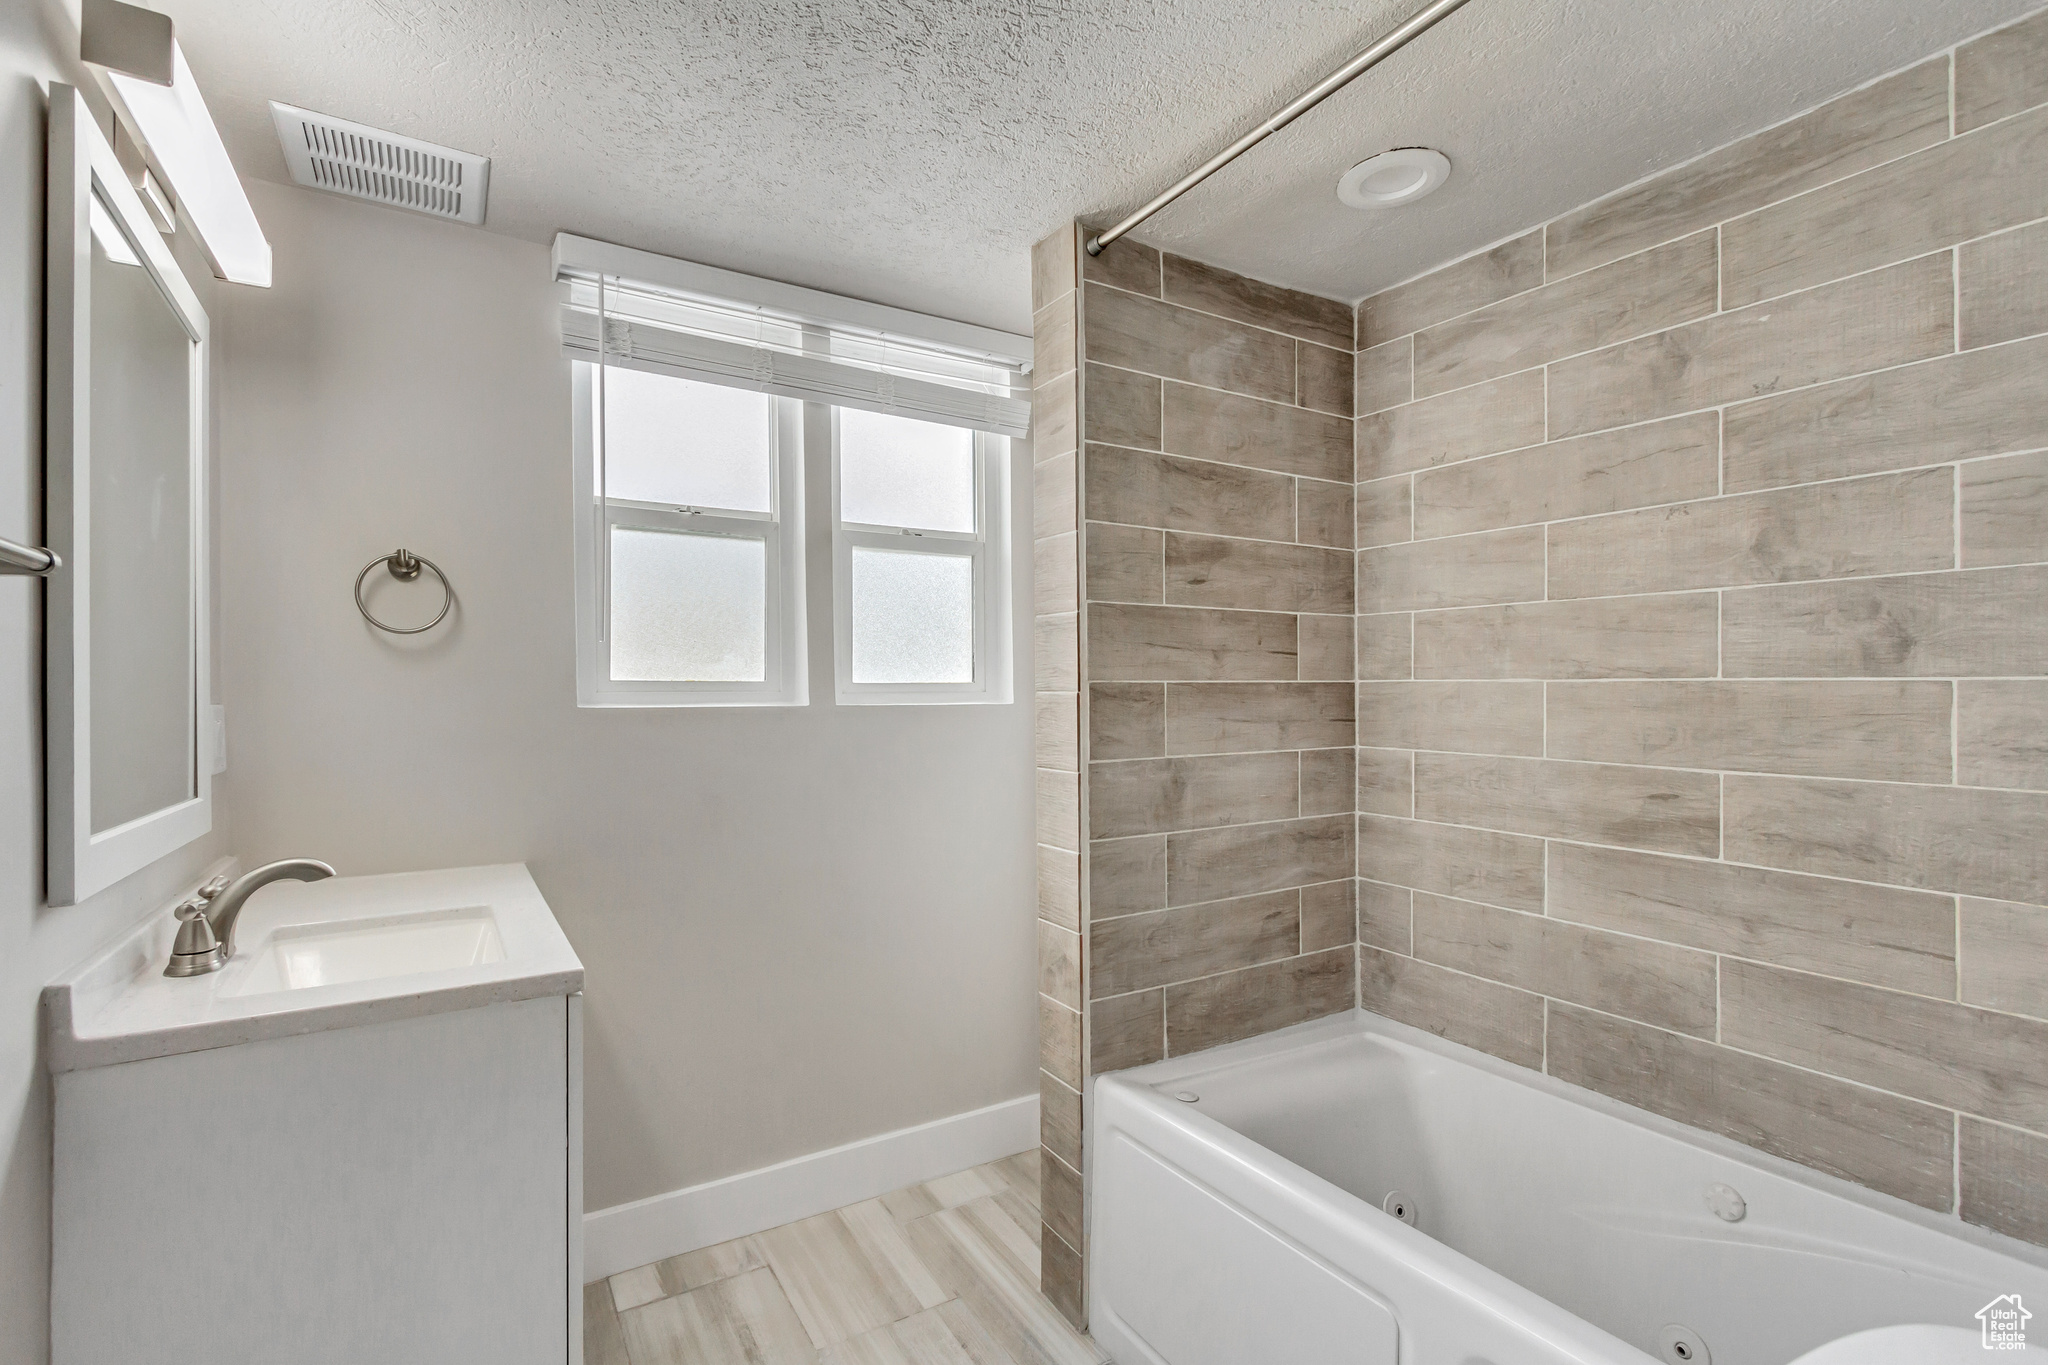 Bathroom with tiled shower / bath combo, vanity, and a textured ceiling